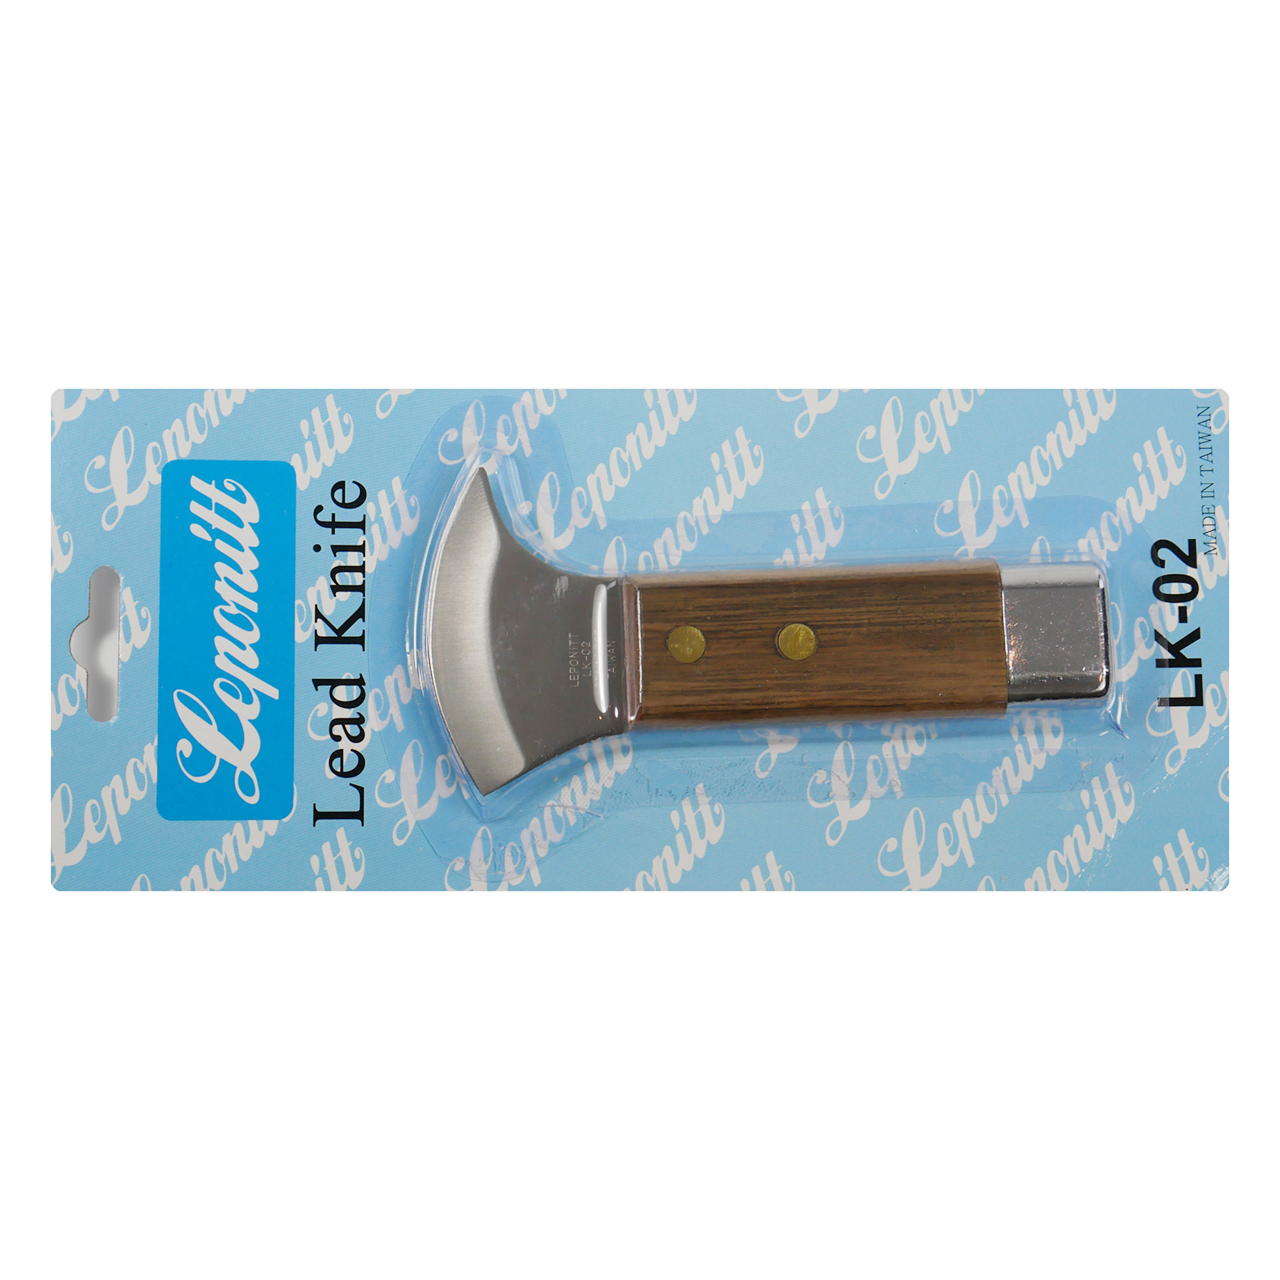 Lead knife with Cut blade small